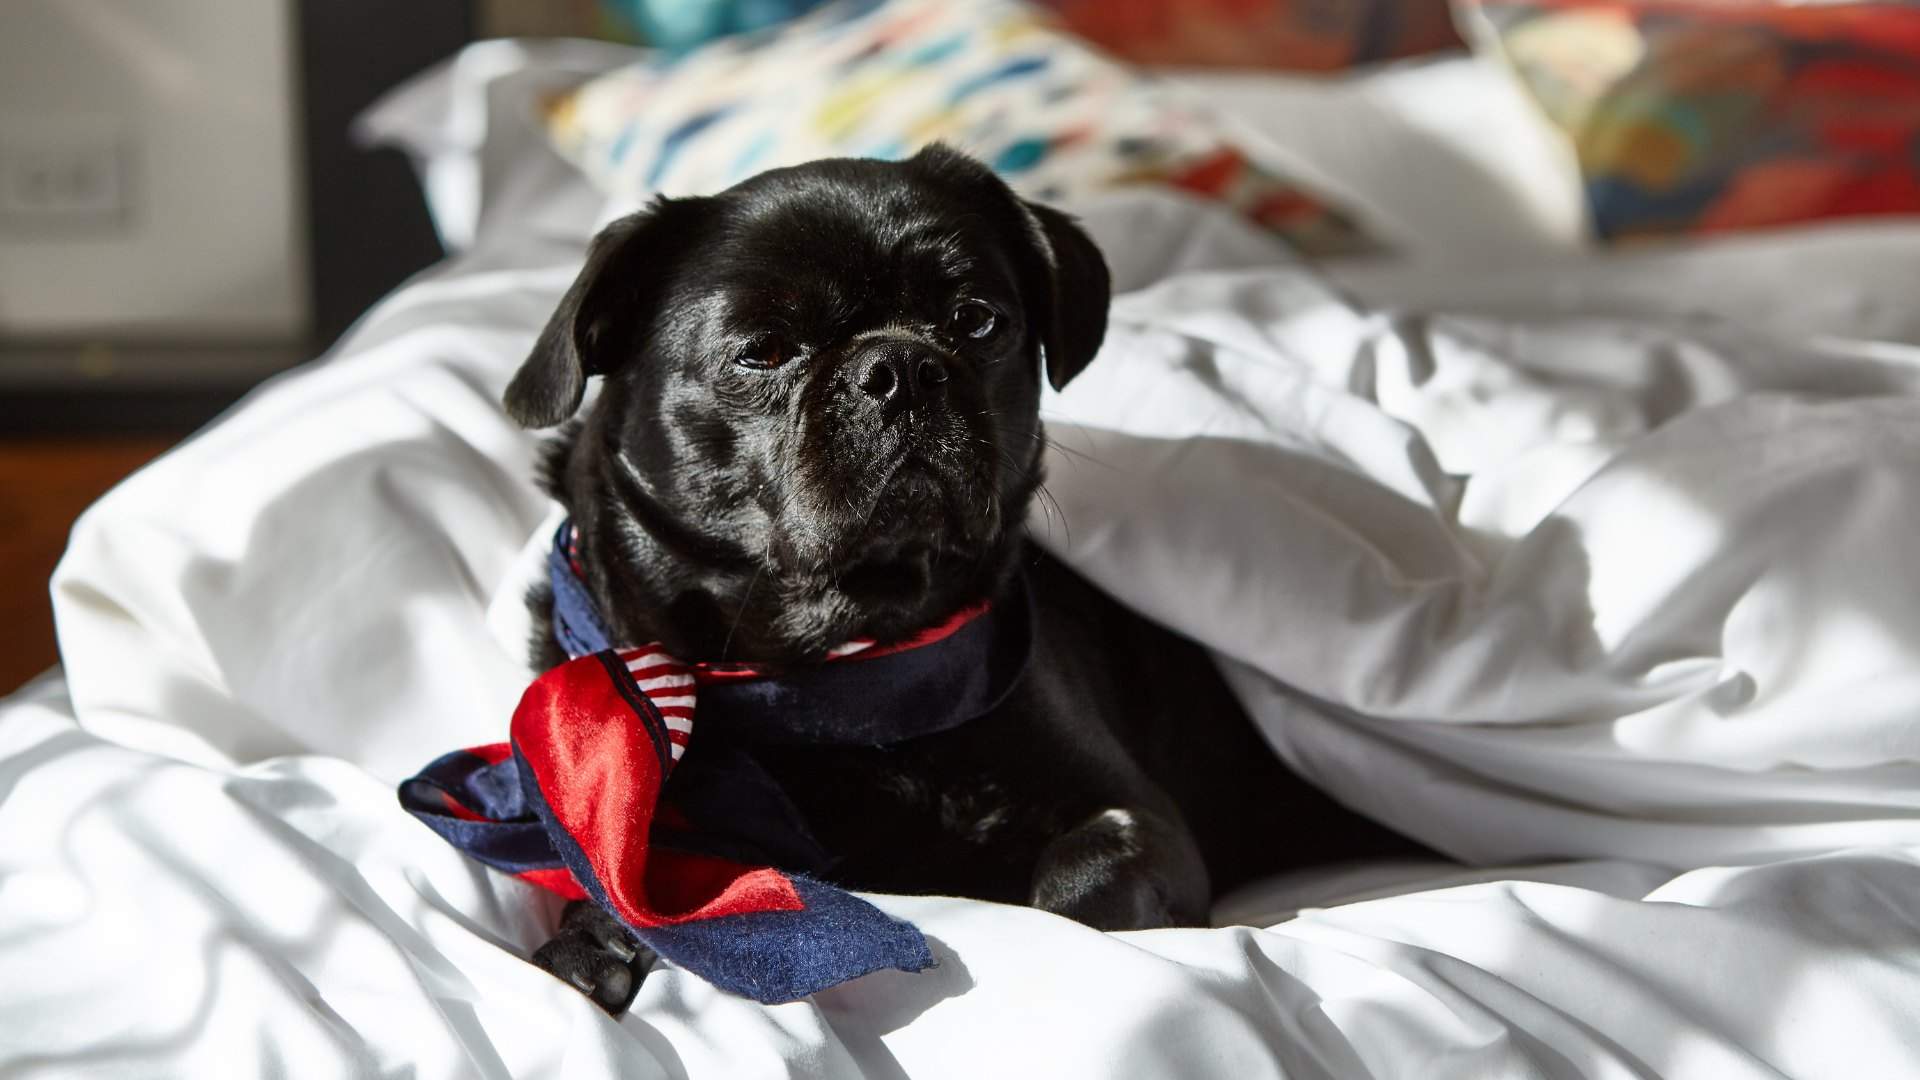 Sydney's Old Clare Hotel Now Has Pet-Friendly Suites Complete with 24-Hour Room Service